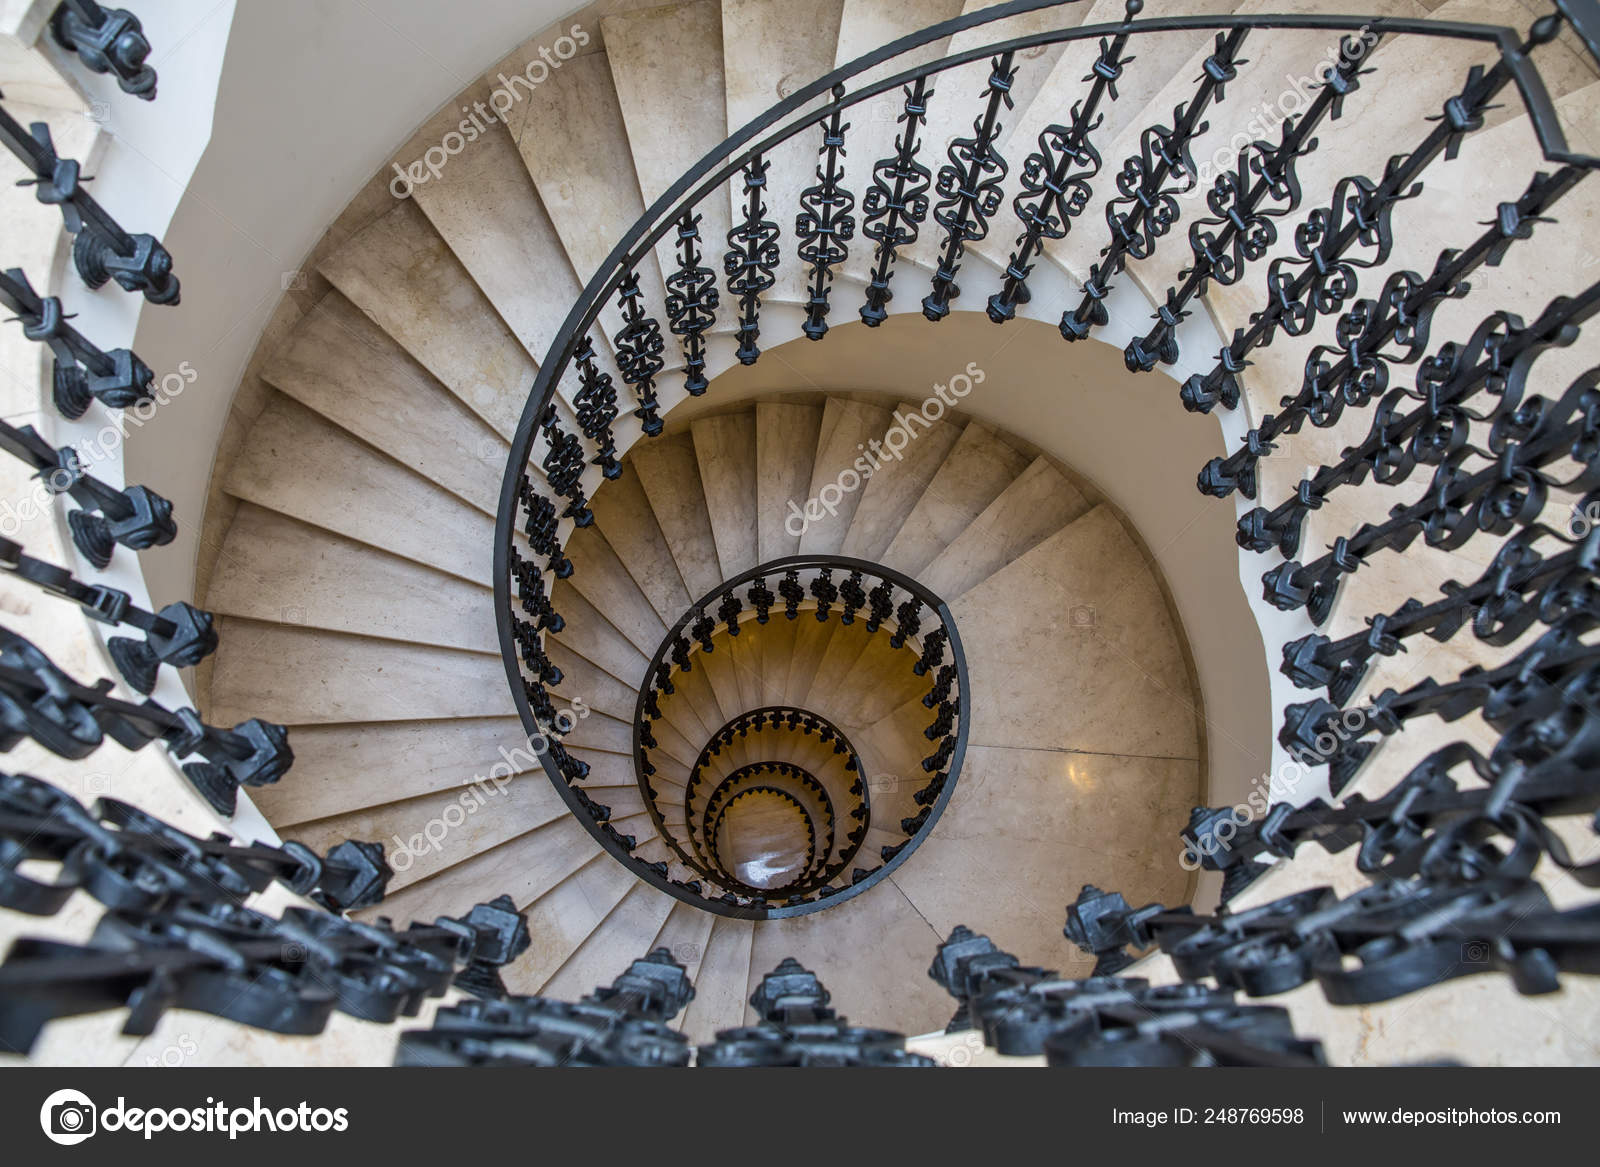 Top Beautiful Spiral Staircase Photo by 248769598